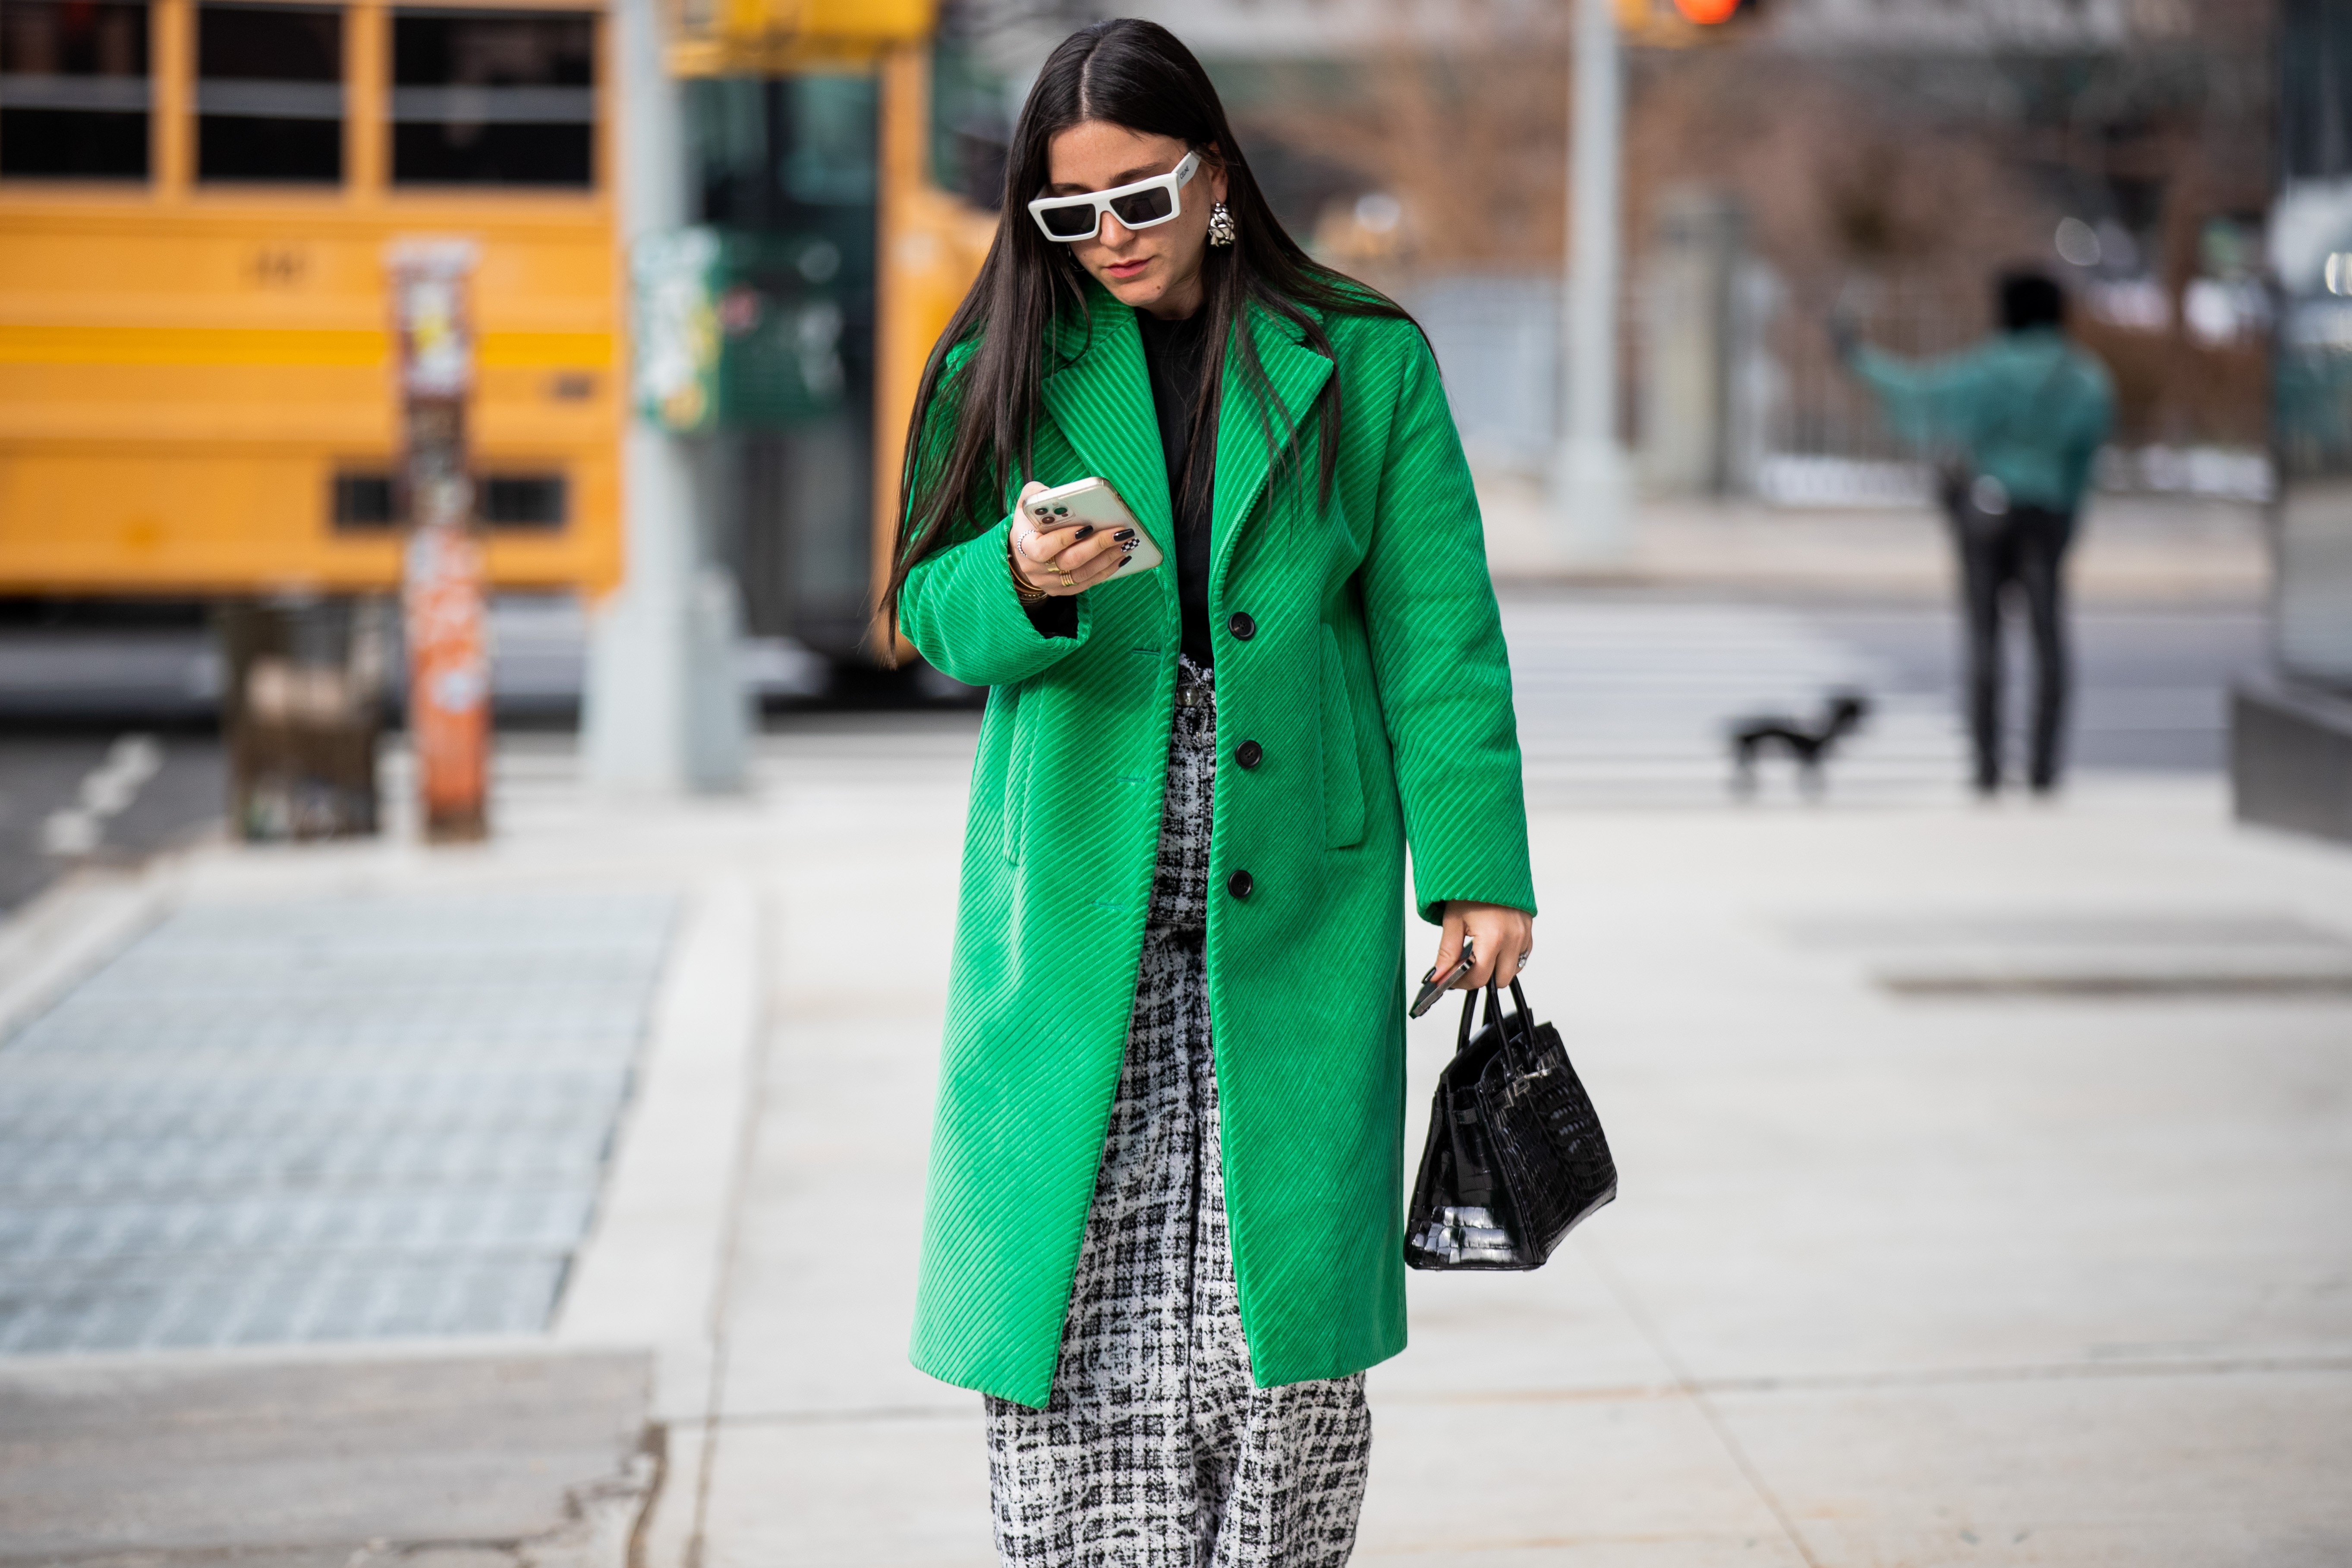 NEW YORK, NEW YORK - FEBRUARY 16: A guest is seen wearing checkered black white wide leg pants, green coat, Hermes bag outside Prabal Gurung during New York Fashion Week on February 16, 2022 in New York City. (Photo by Christian Vierig/Getty Images) (Foto: Getty Images)